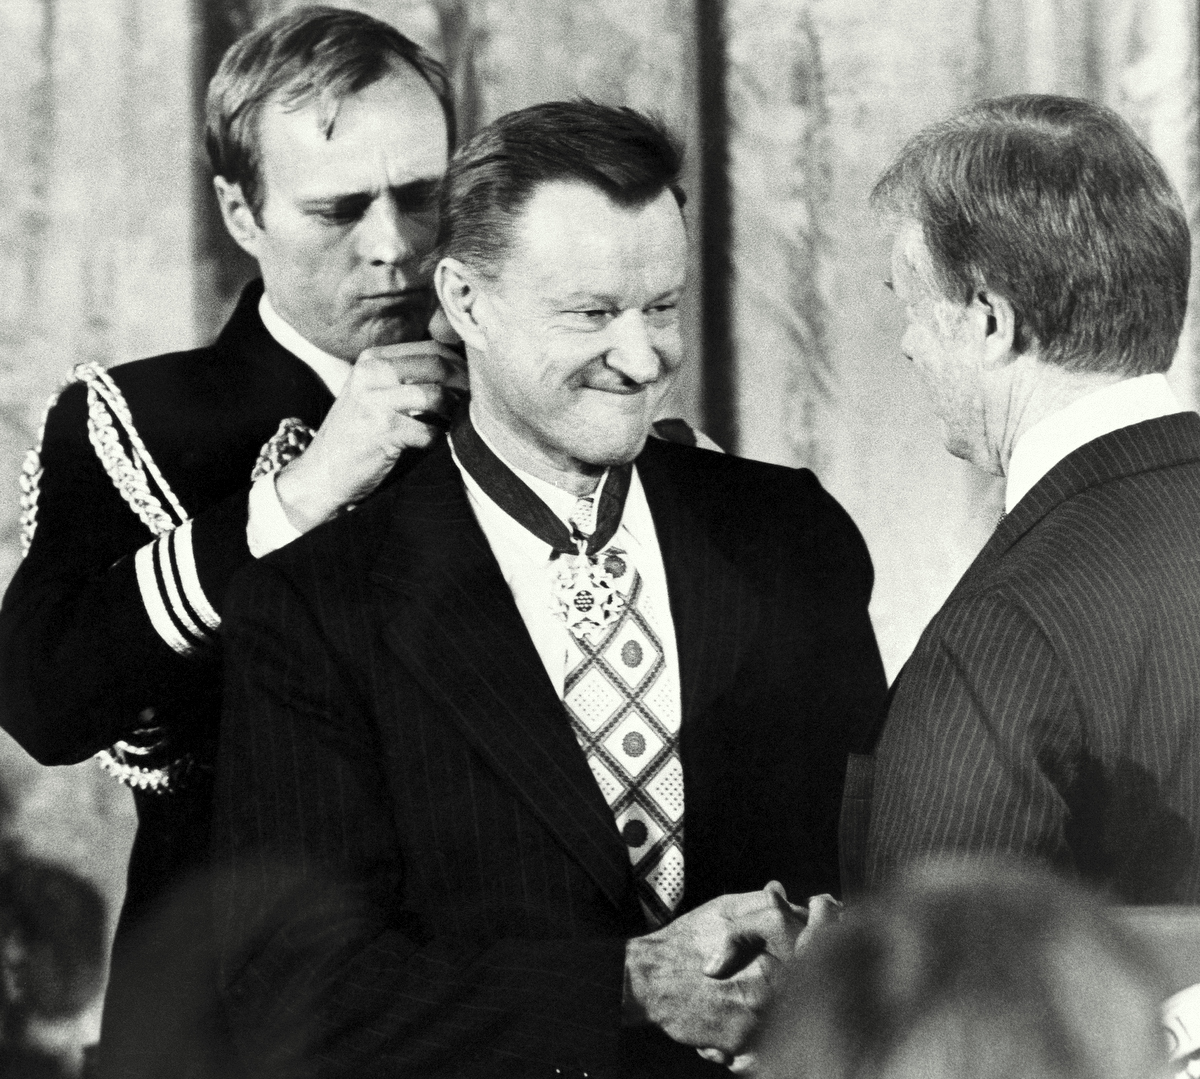 President Carter shakes hands with his national security adviser, Zbigniew Brzezinski, as he presents Brzezinski with the Medal of Freedom at a White House ceremony on Friday, Jan. 17, 1981 in Washington. Brzezinski was one of 15 recipients of the nation?s highest civilian awards, presented for service to U. S. security or national interests, world peace or cultural endeavors. (AP Photo)